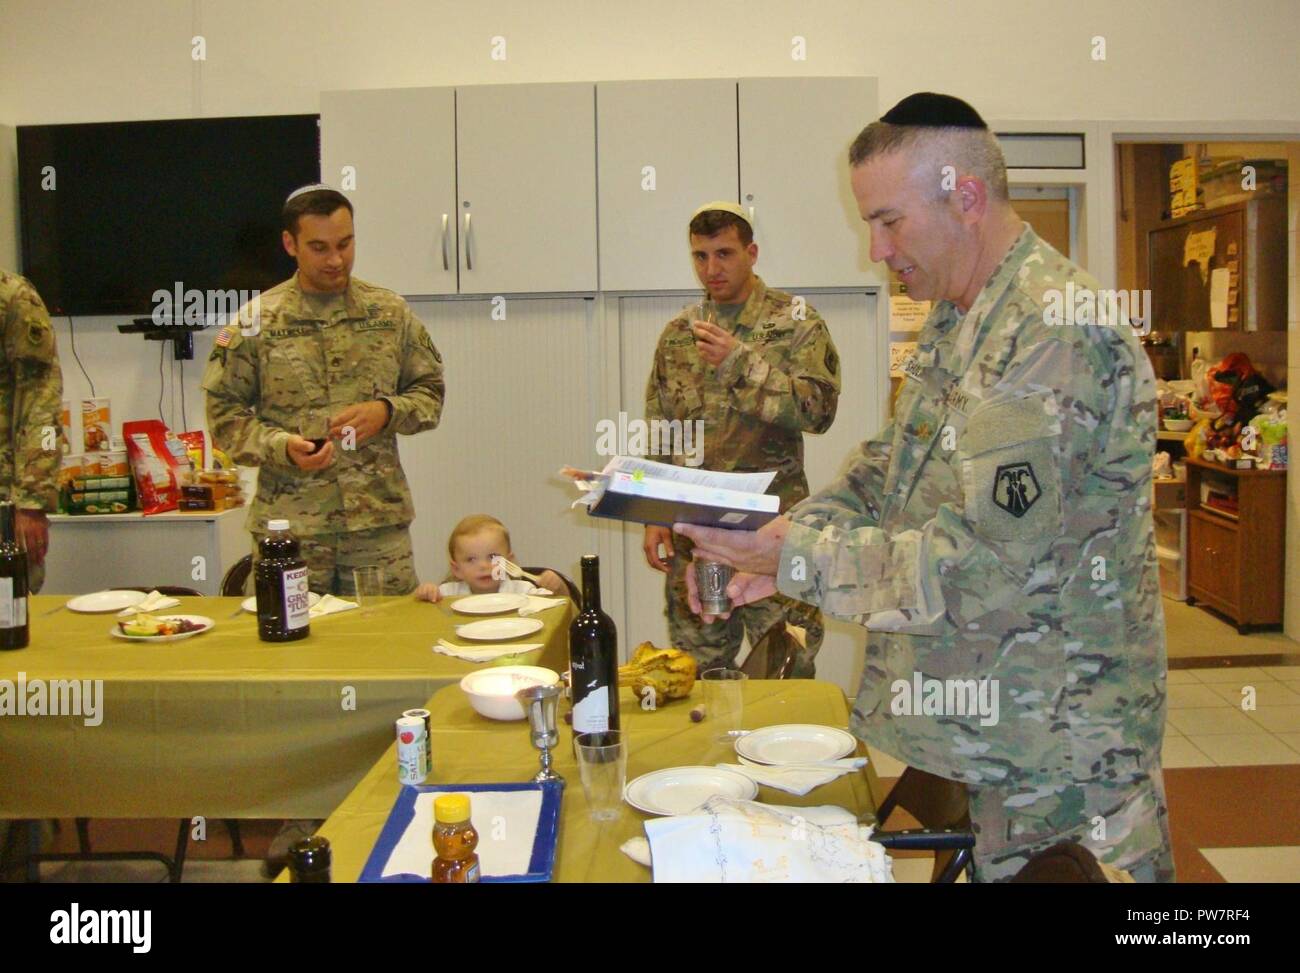 Chaplain Maj. Andrew Shulman, of the 88th Chaplain Detachment, 7th Mission Support Command, leads worship services for Rosh Hashanah (Jewish New Year) at Caserma Ederle in Vicenza, Italy. Stock Photo